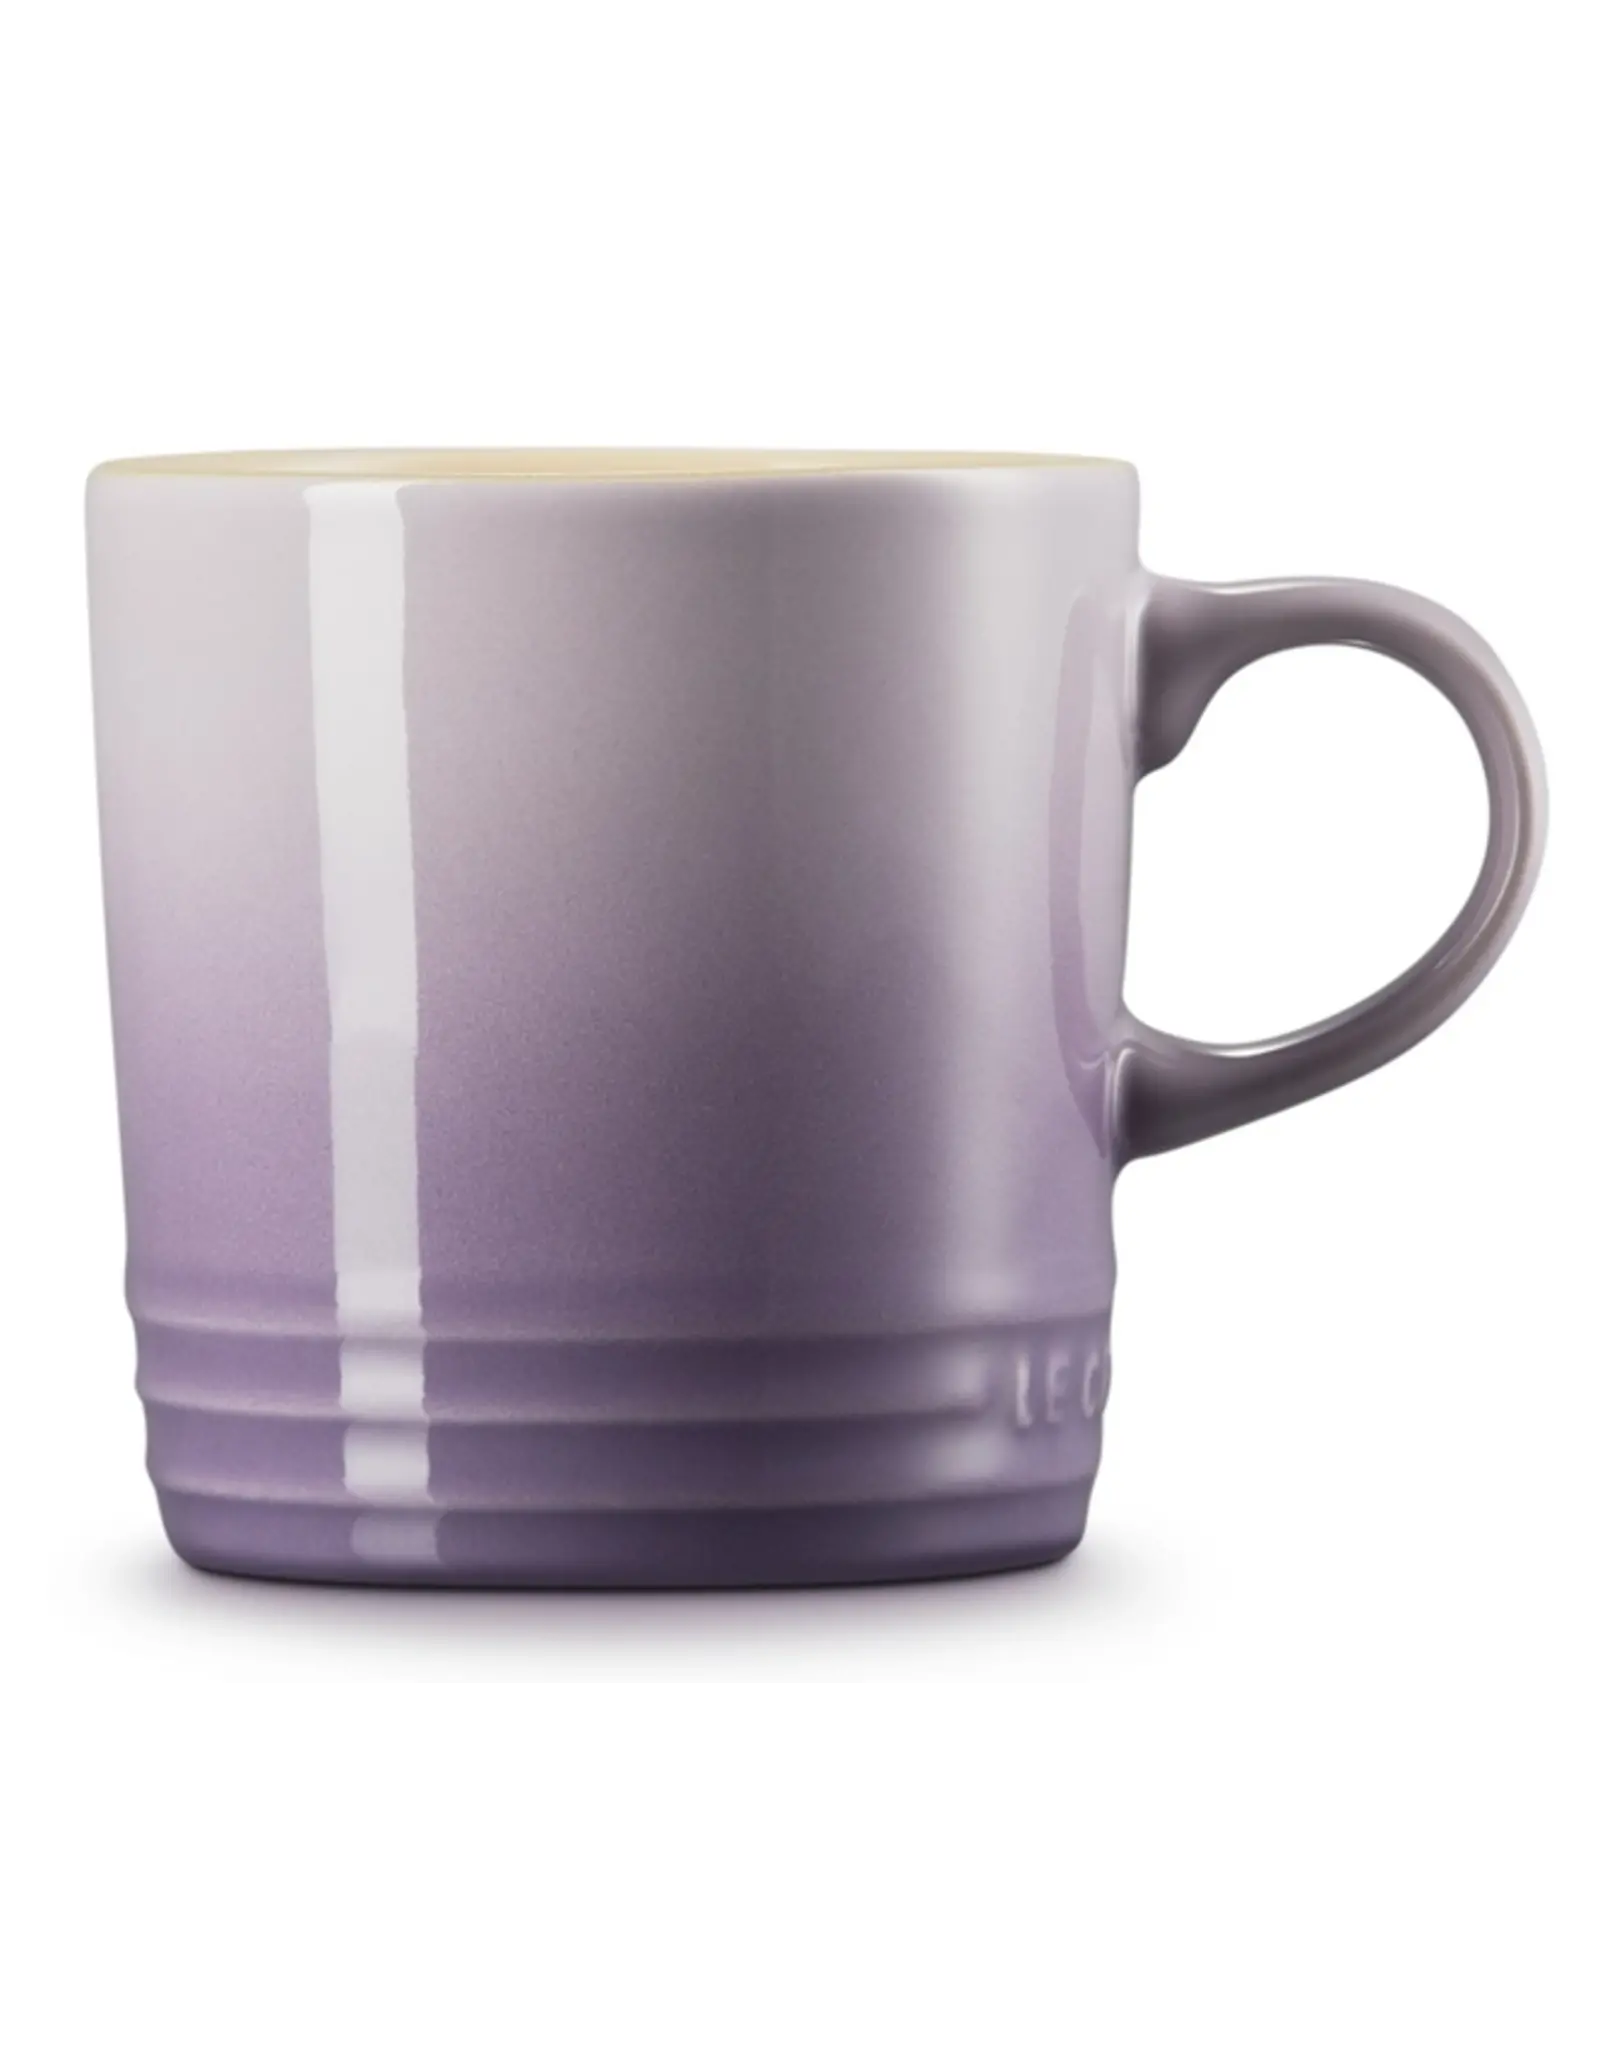 Le Creuset Mok Bluebell Paars 350ml